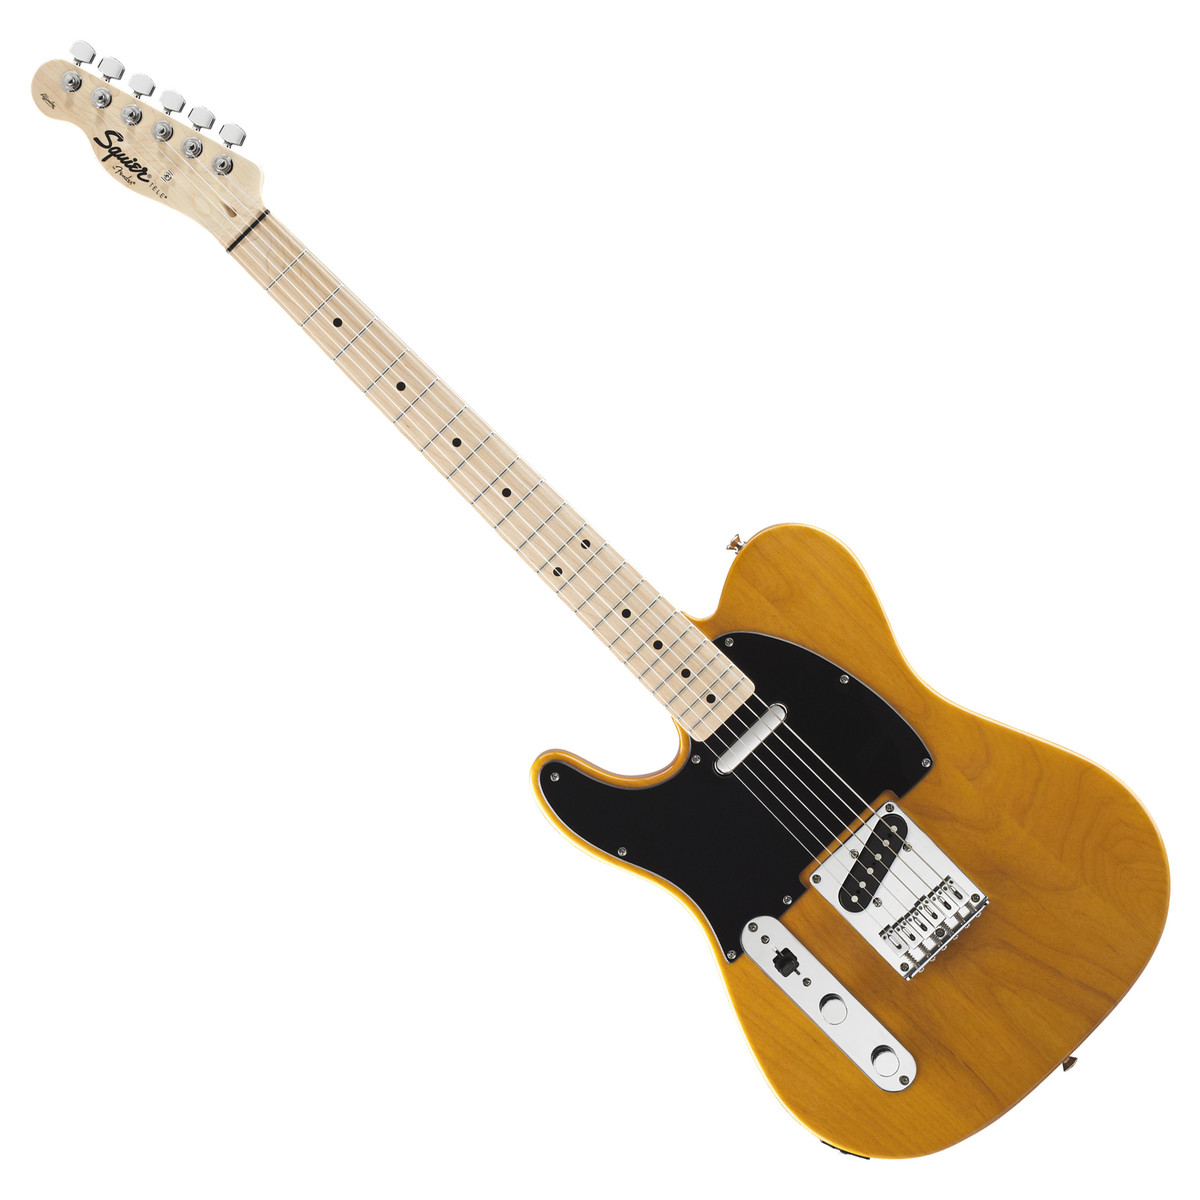 Squier Affinity Series Telecaster - Butterscotch Blonde left hand